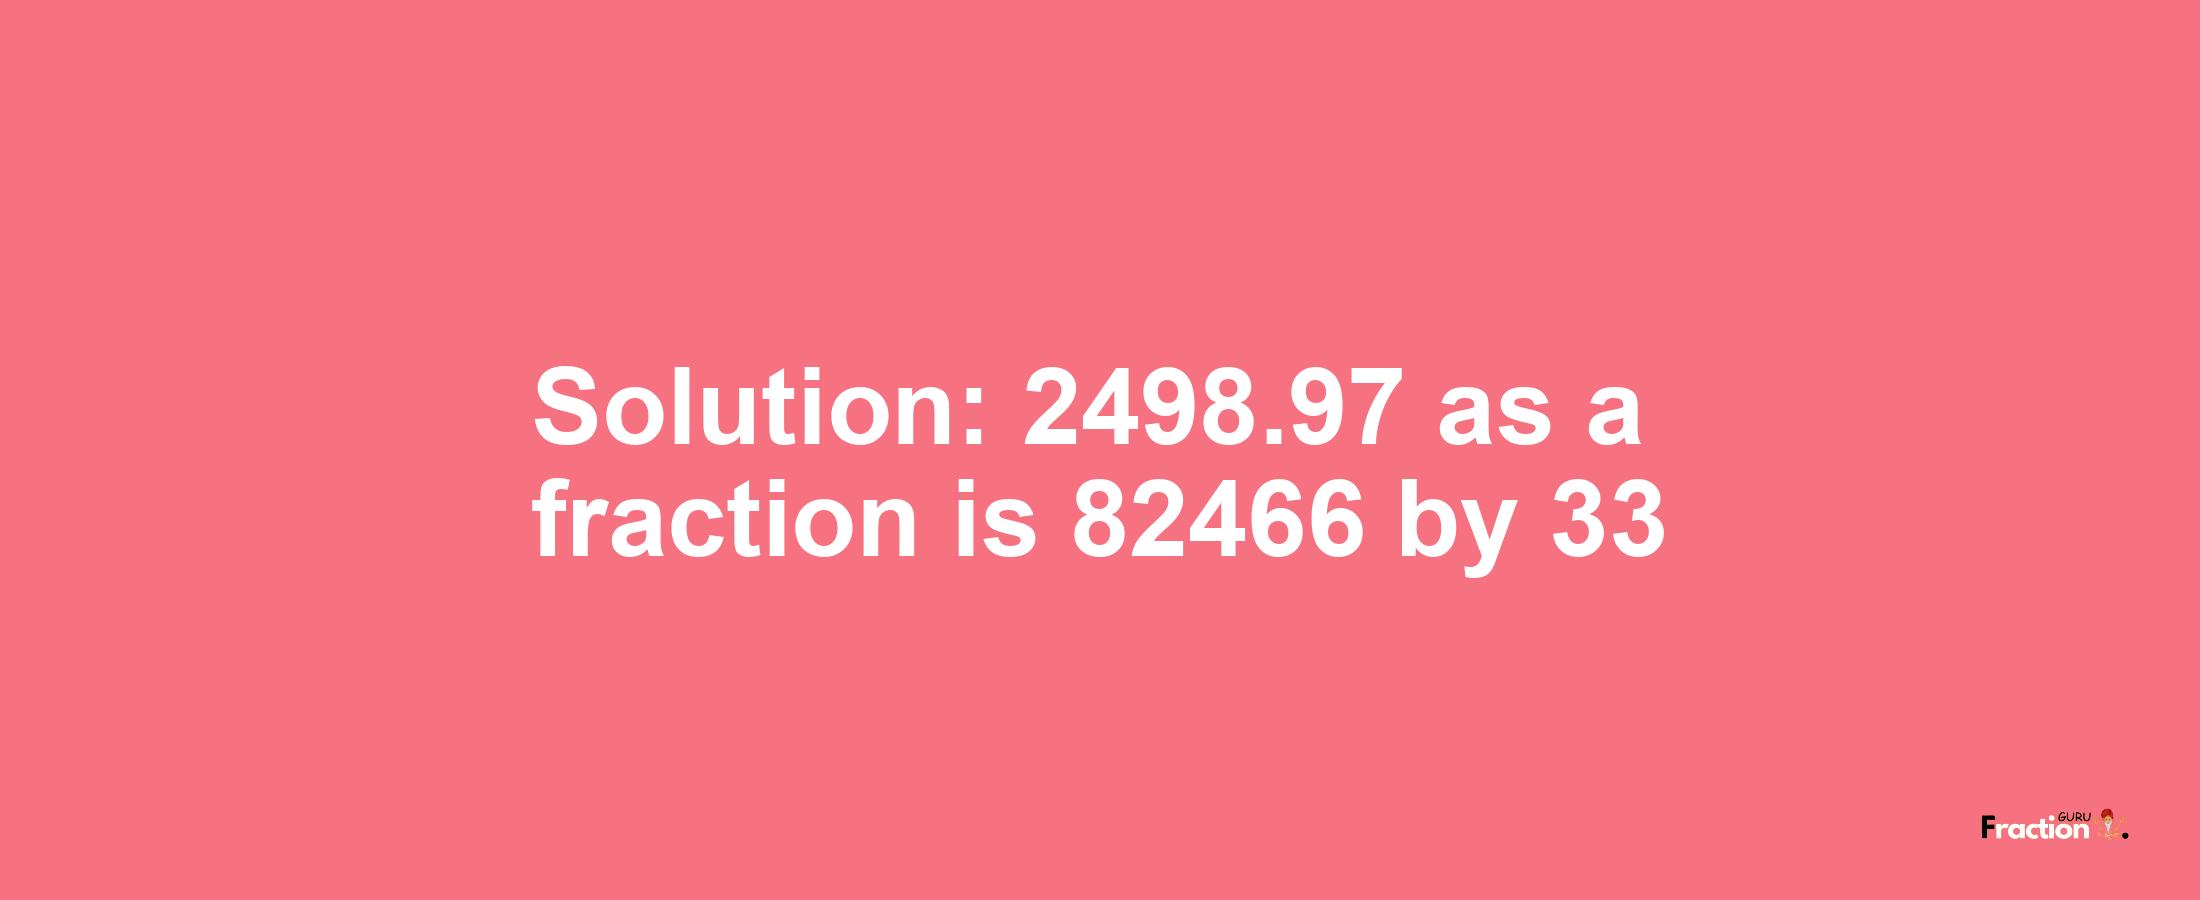 Solution:2498.97 as a fraction is 82466/33